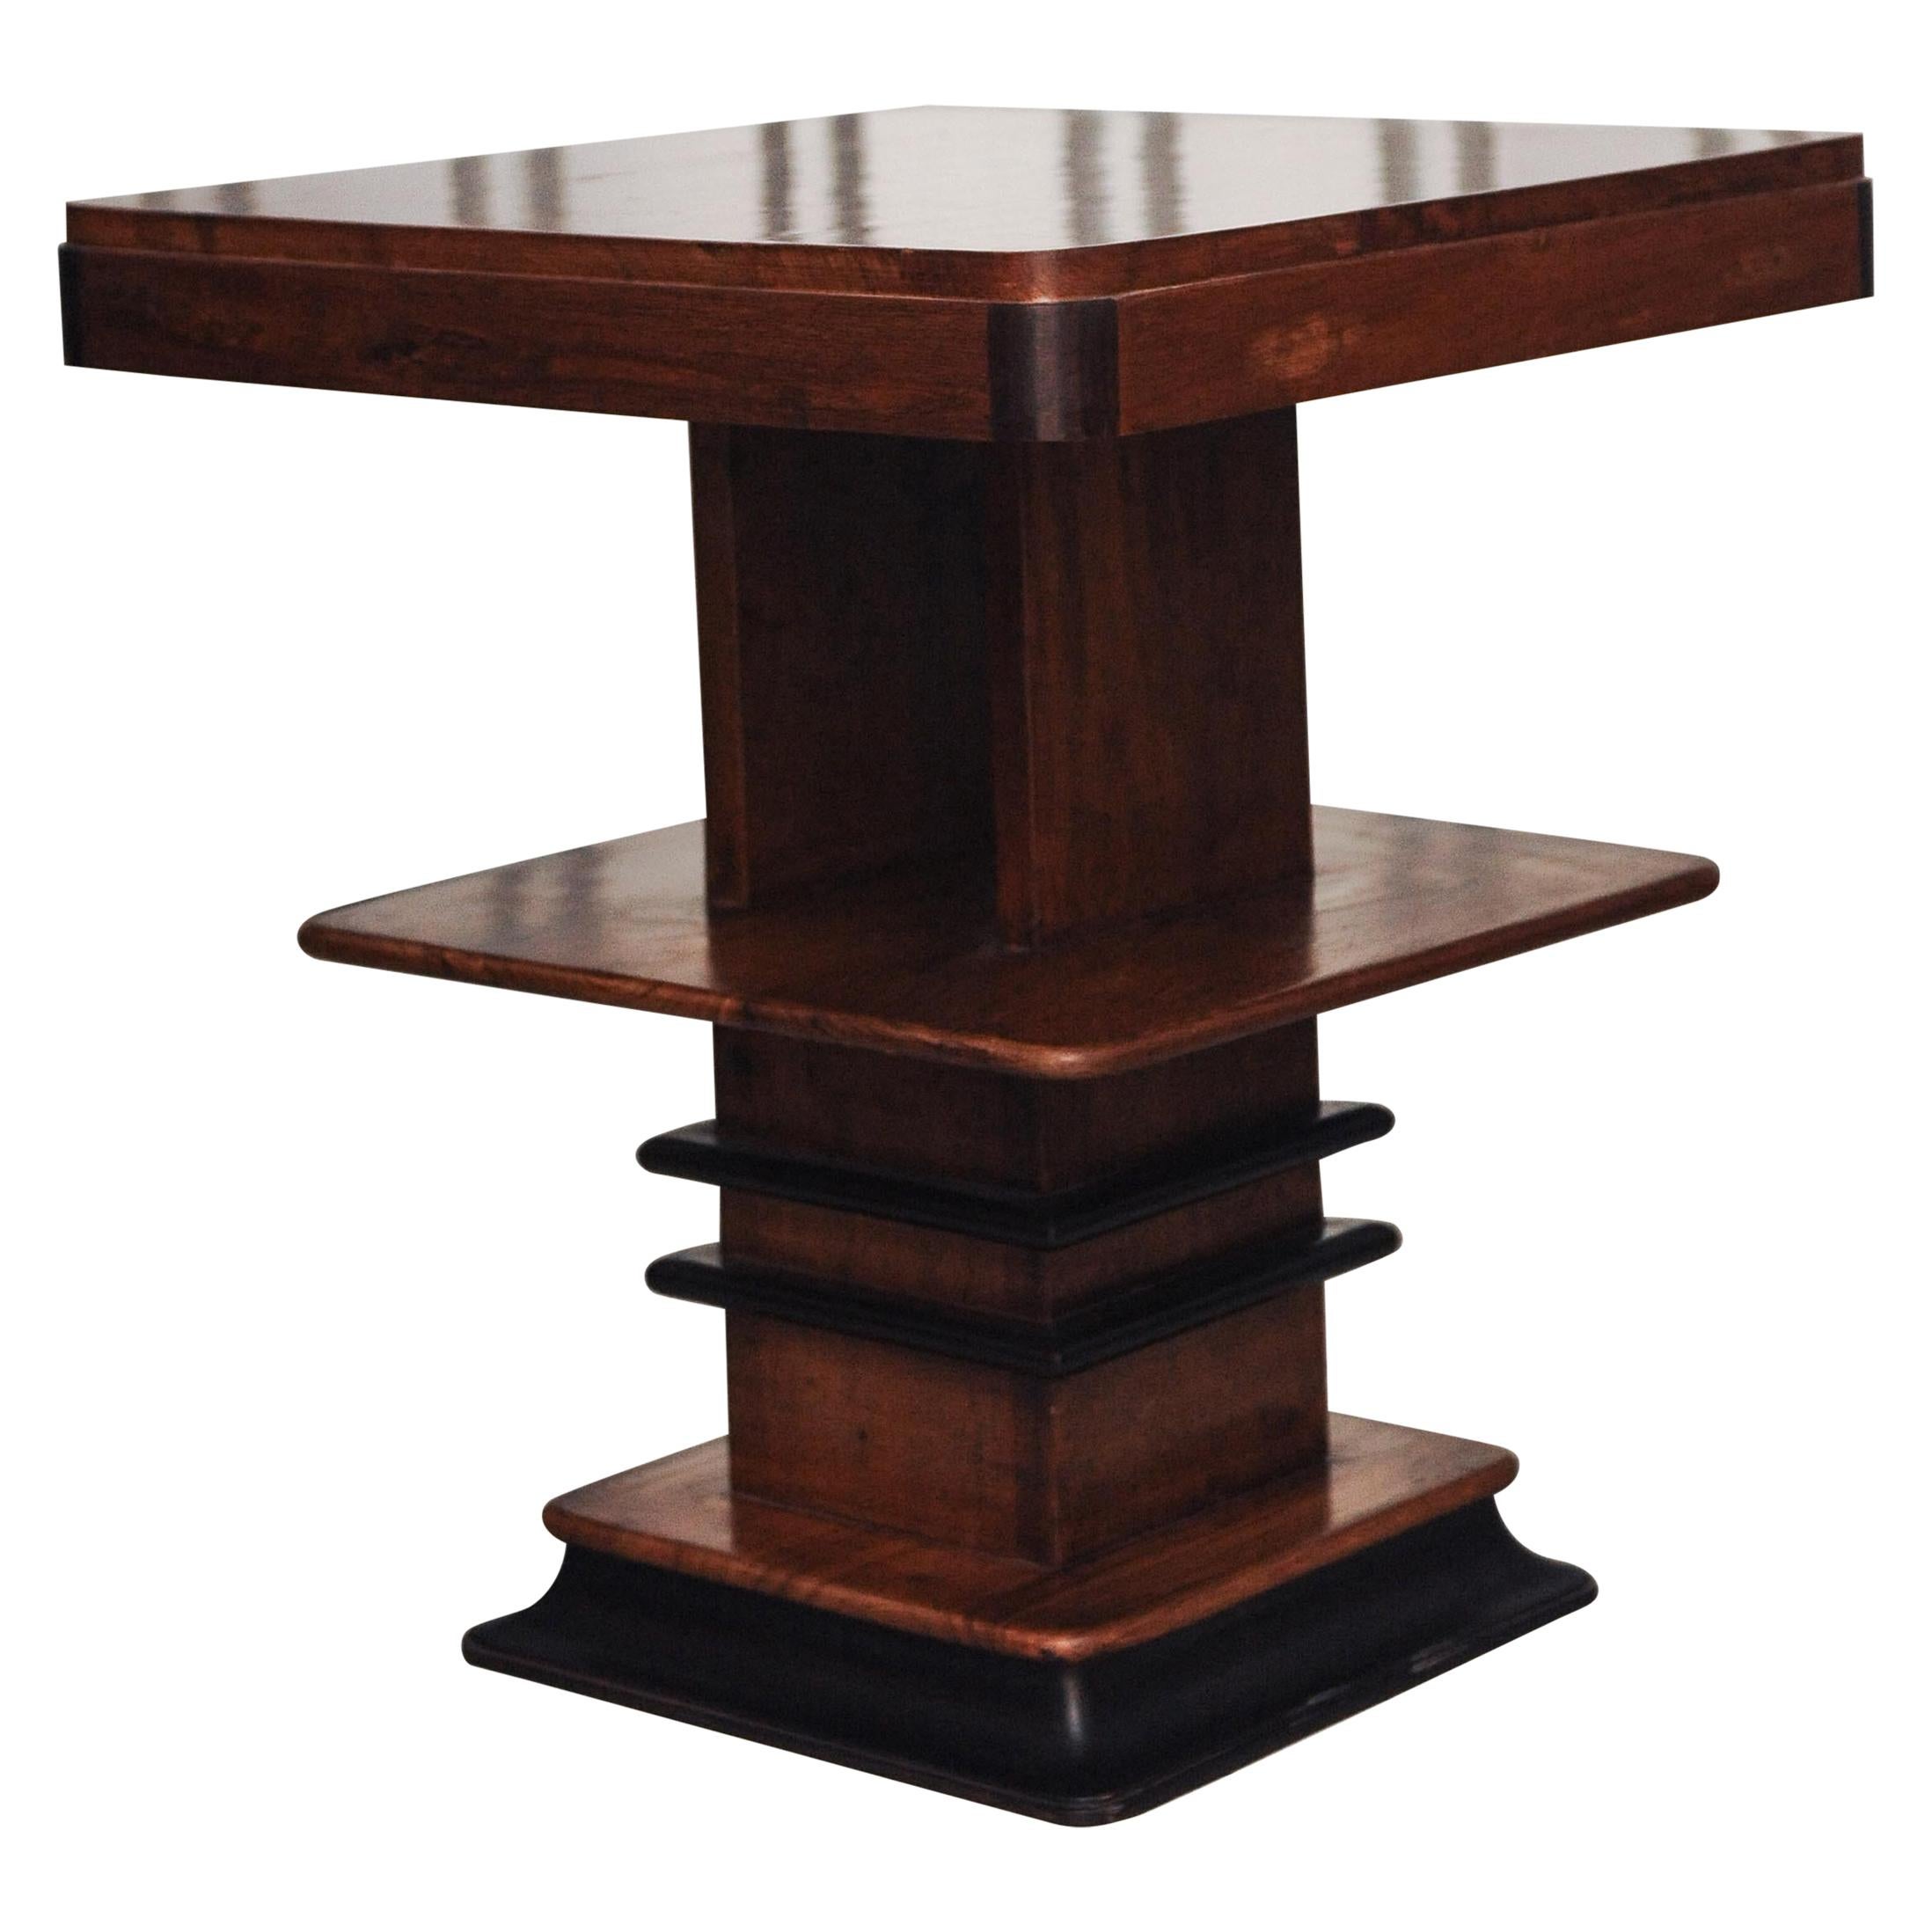 1930s walnut and lacquered Art Deco three-tiered graduated side tables.